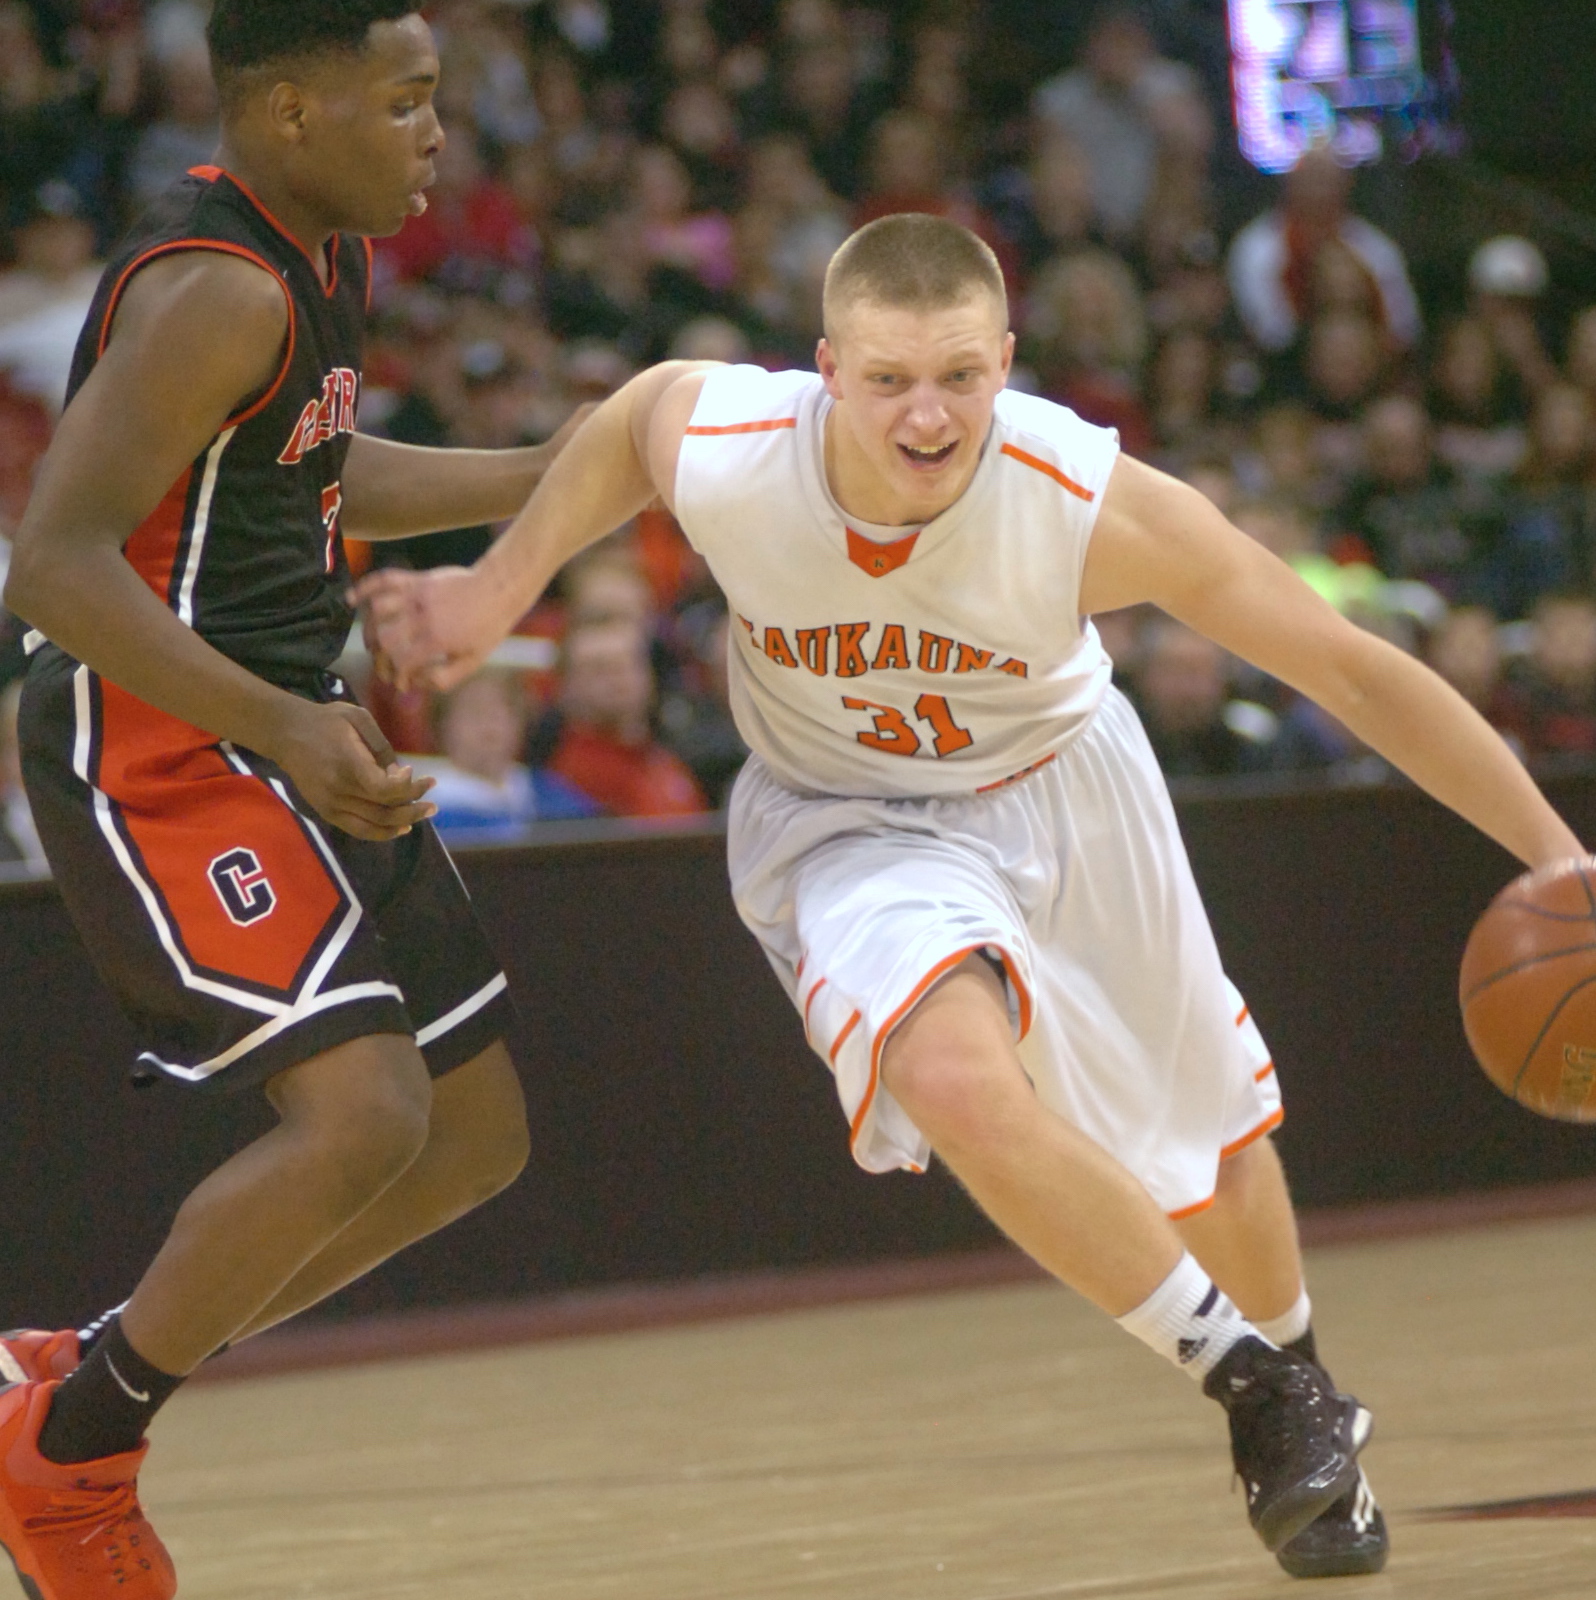 Adam Smith drives to the basket during the second half of Kaukauna's 73-45 WIAA Division 2 semifinal win over La Crosse Central. Dan Plutchak/photo